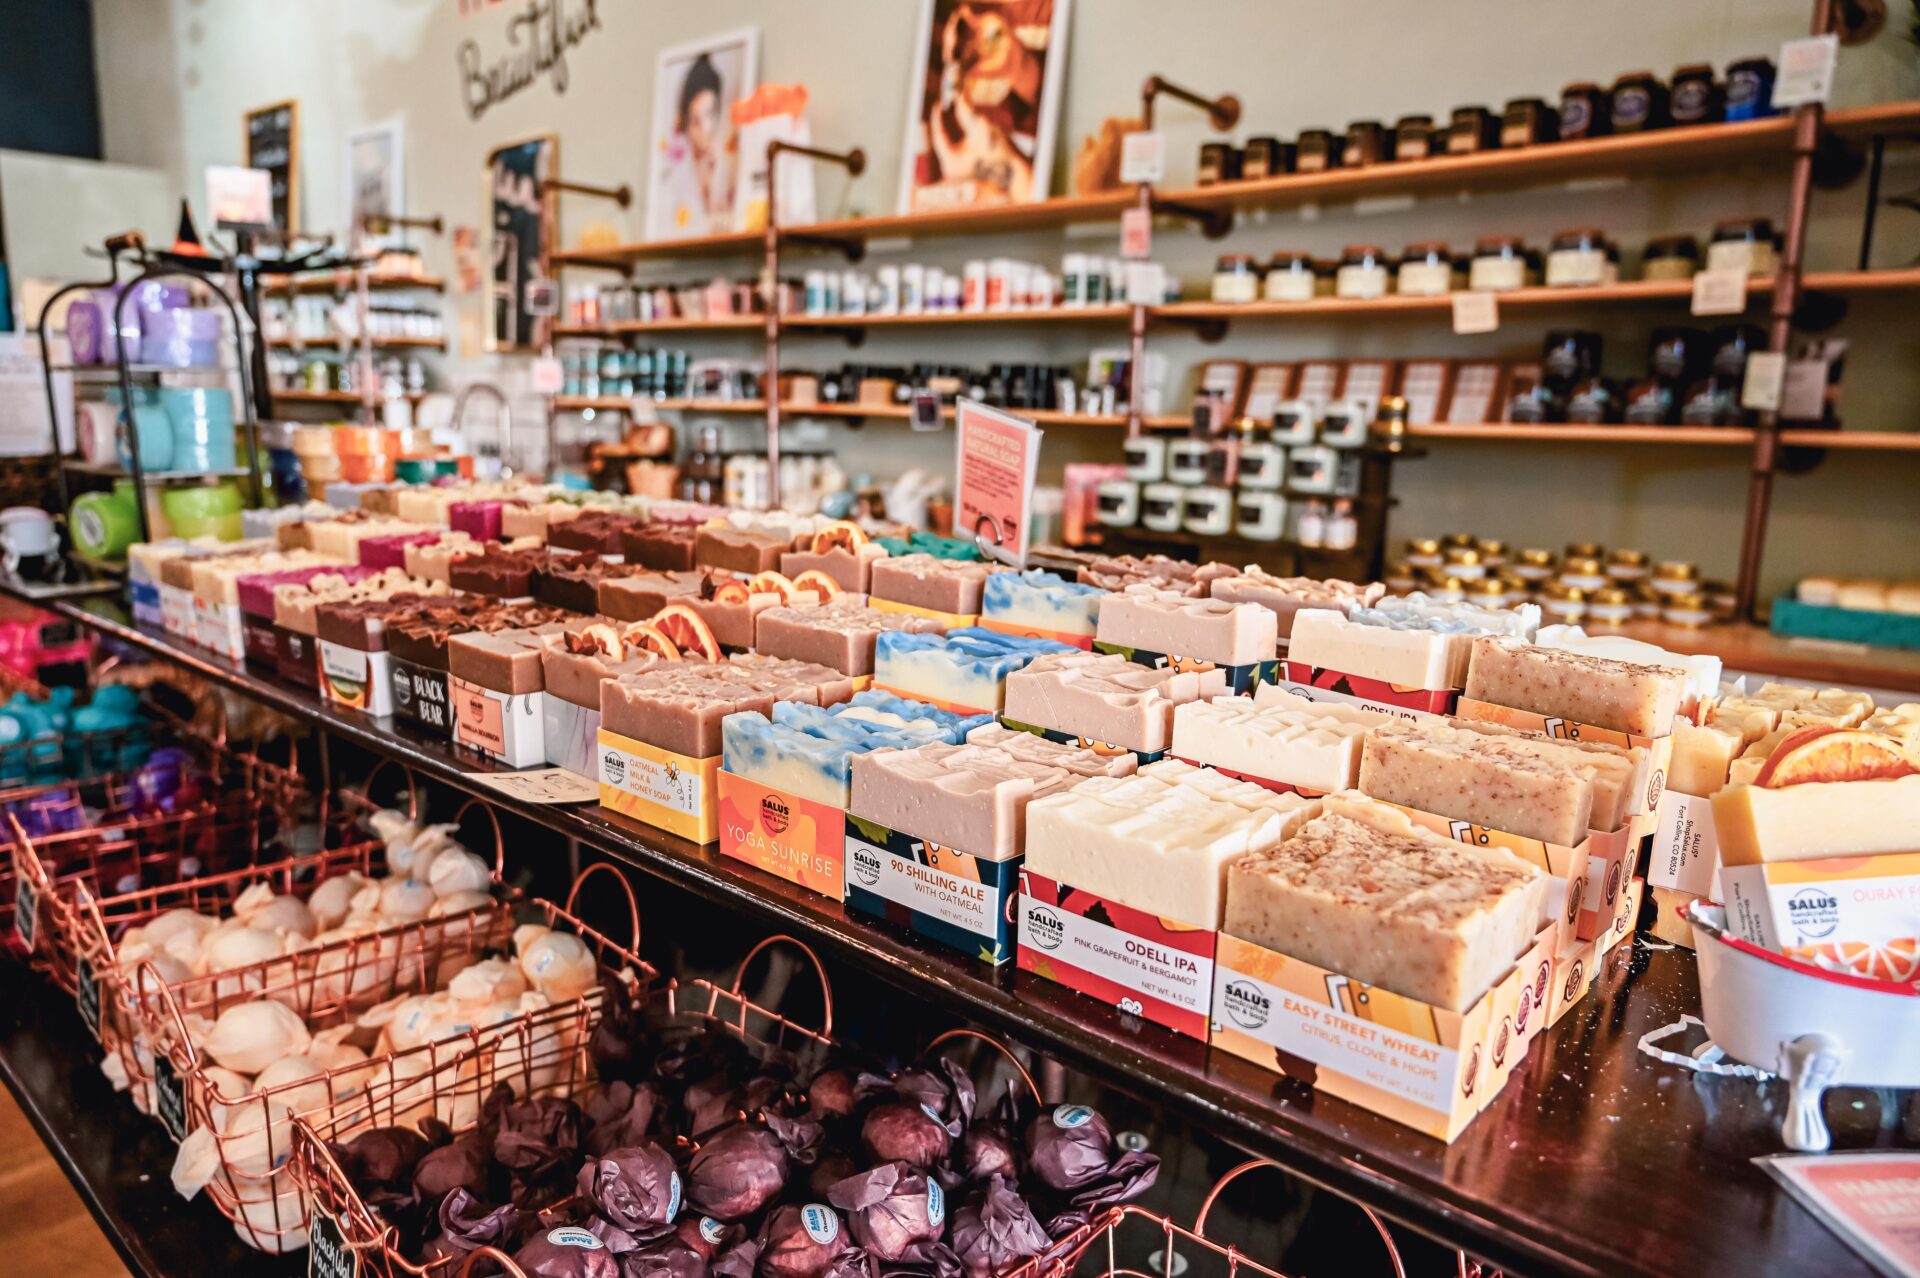 a variety of handmade soaps sit lined on a shelf in the Salus store, various other bath and body items can be seen